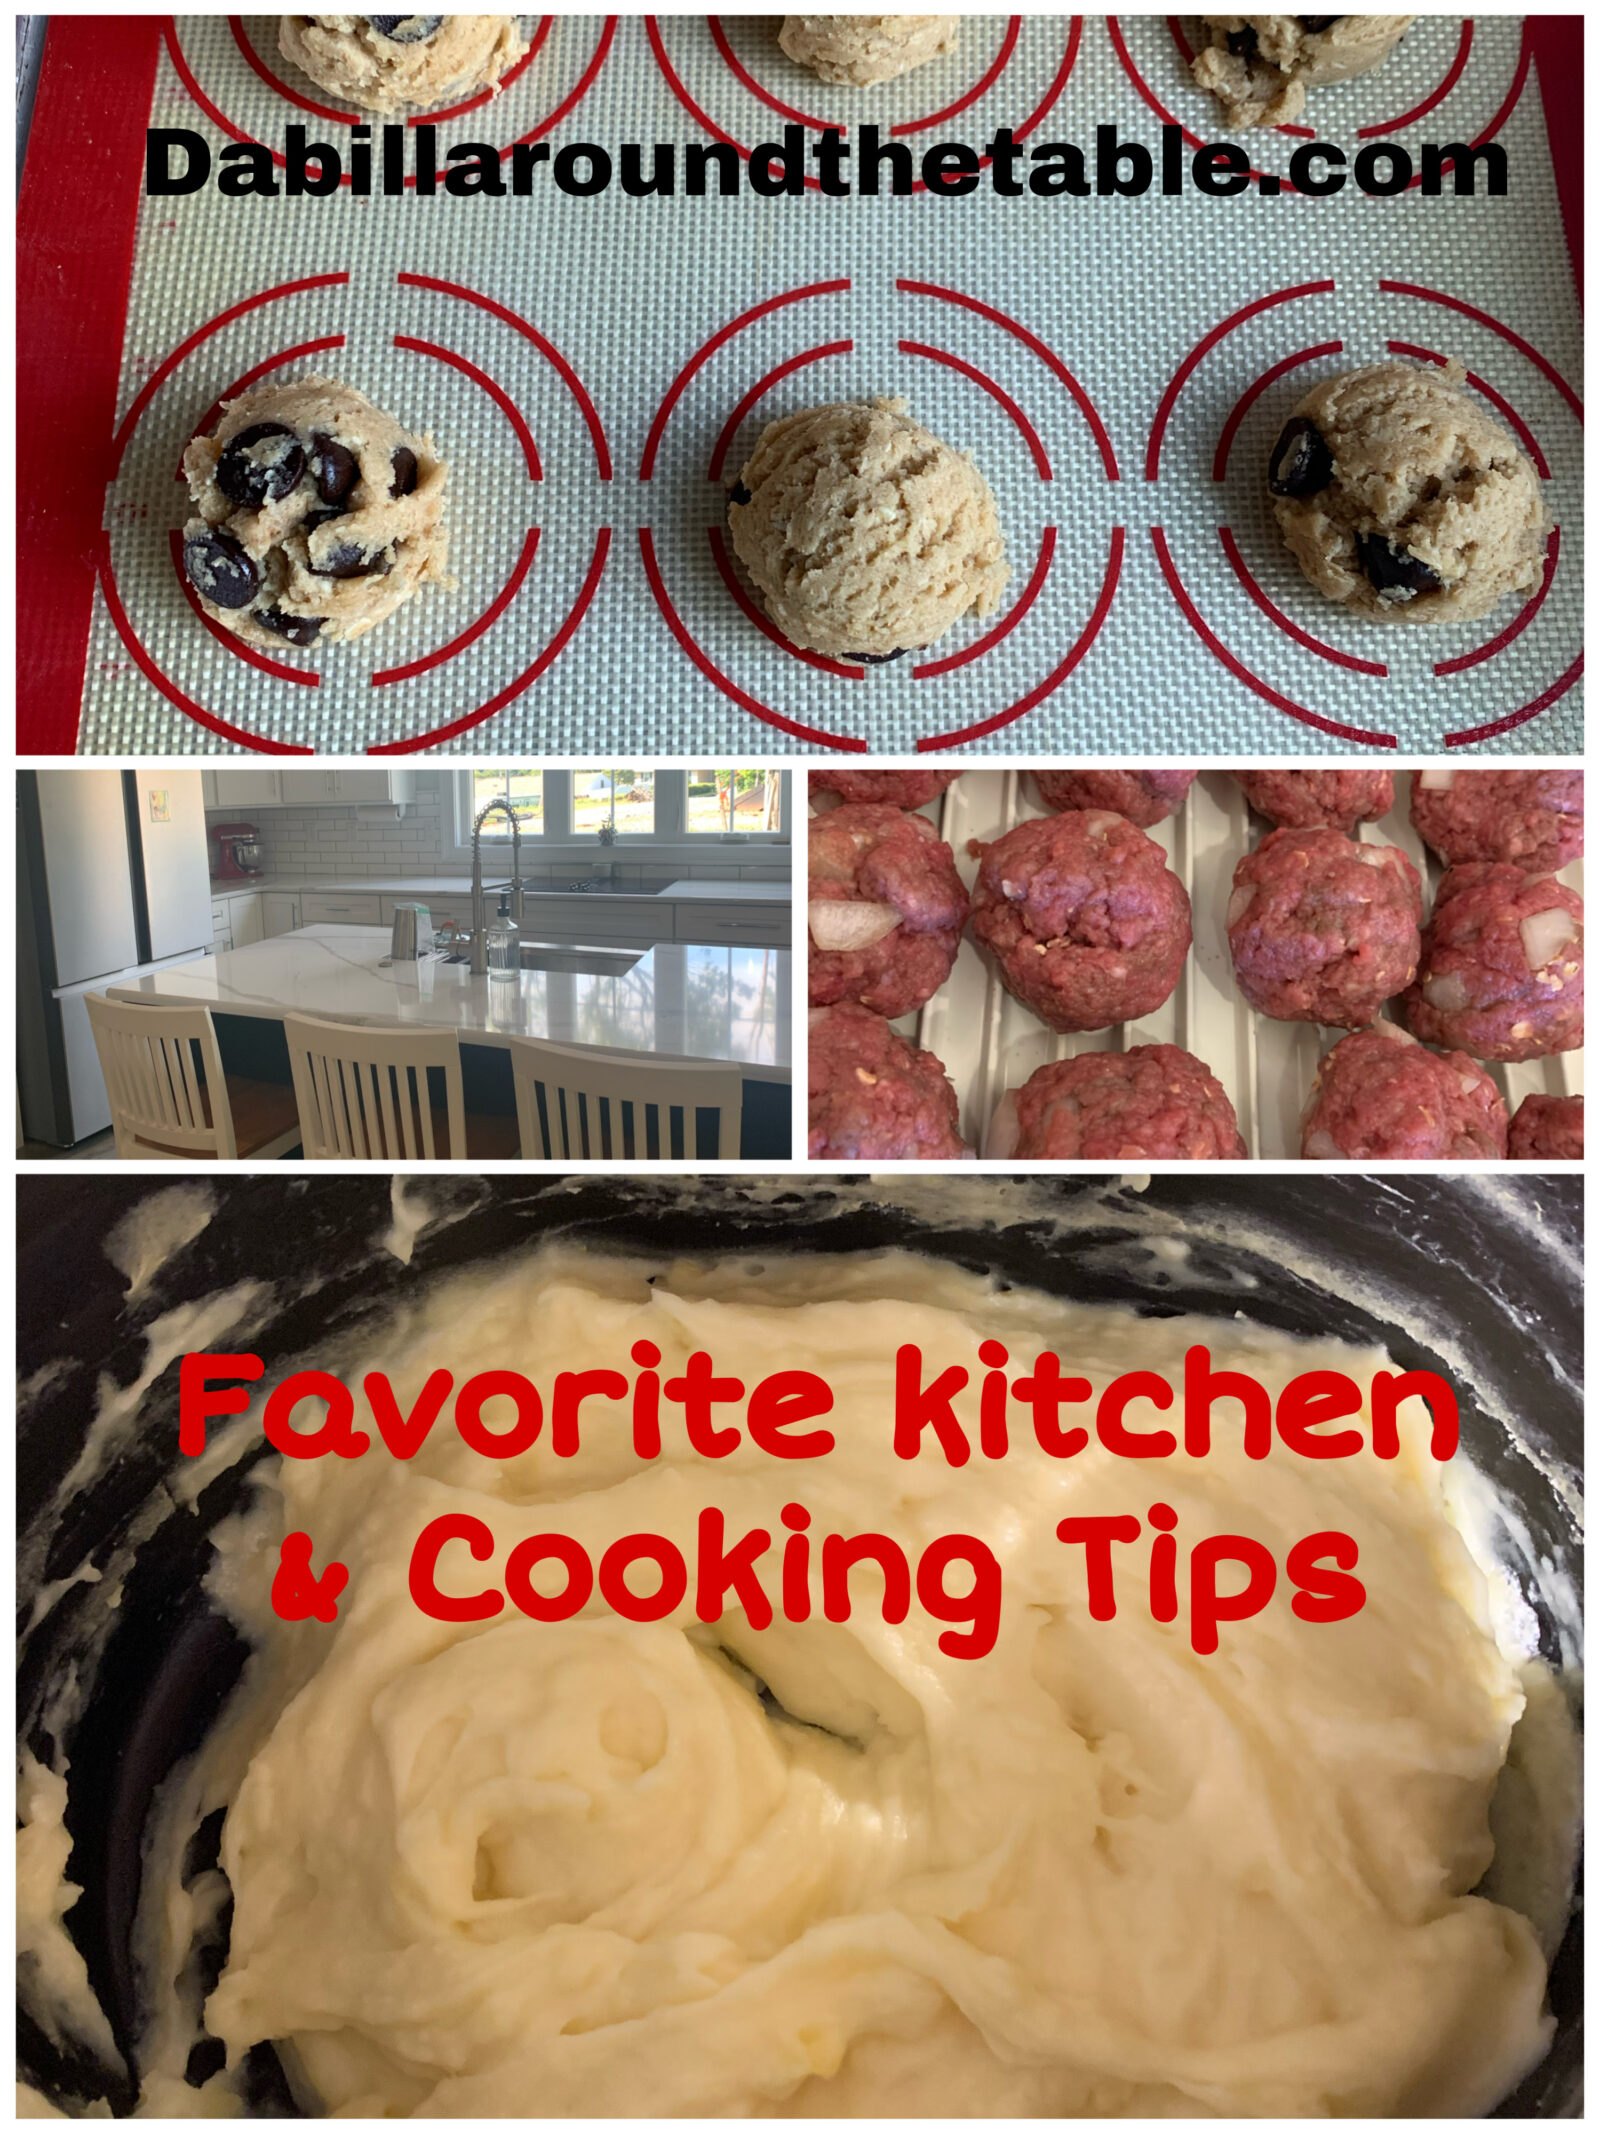 Favorite Kitchen and Cooking Tips